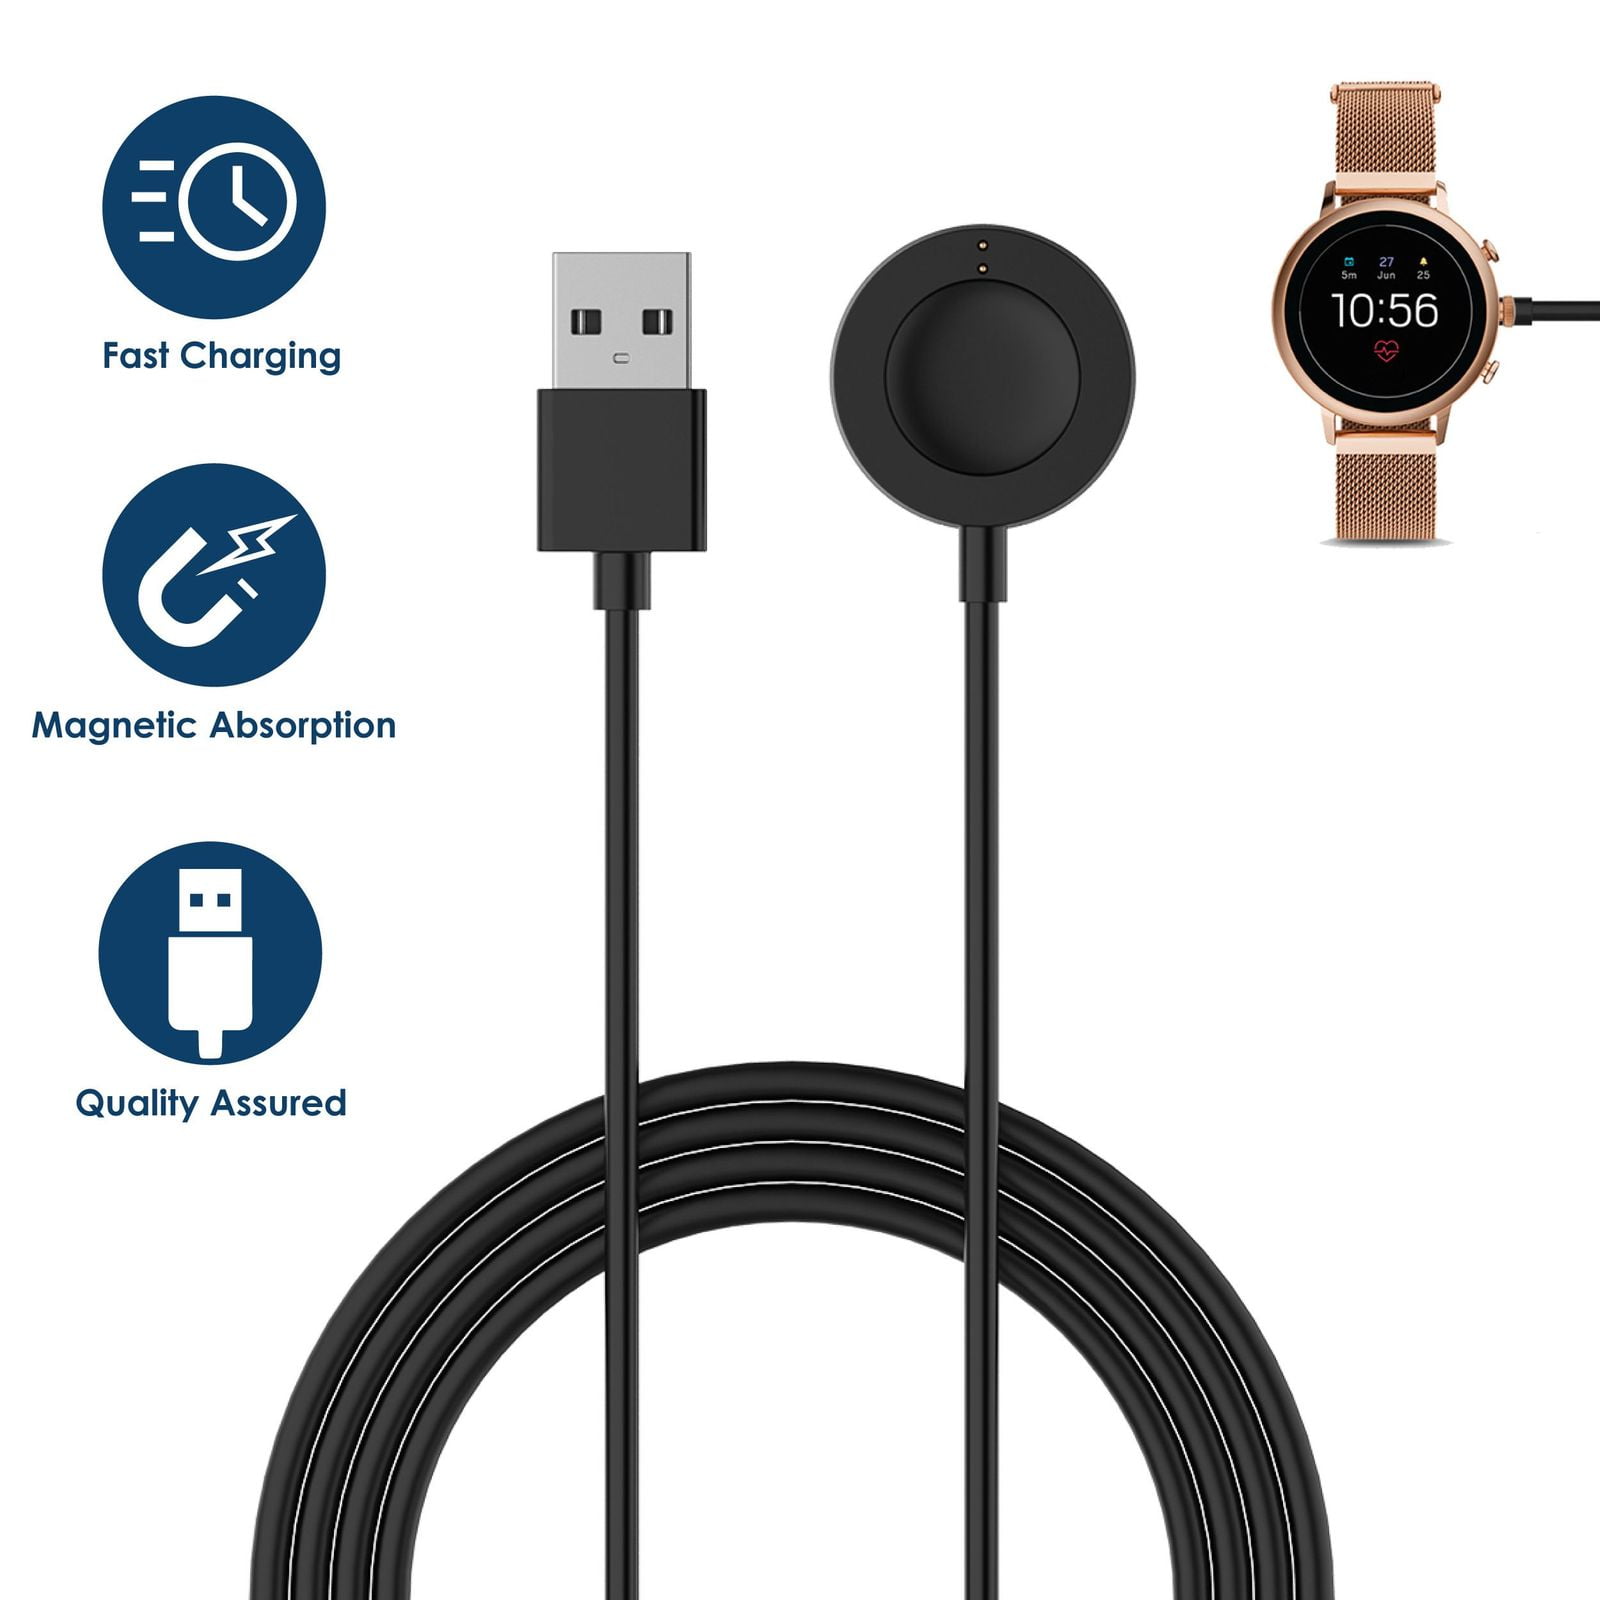 Salme fordom bænk For Fossil Gen 5 Charger, Replacement USB Charging Cable Magnetic Dock  Compatible with Fossil Gen 5 4 Smartwatch, 3 feet Black, by Insten -  Walmart.com